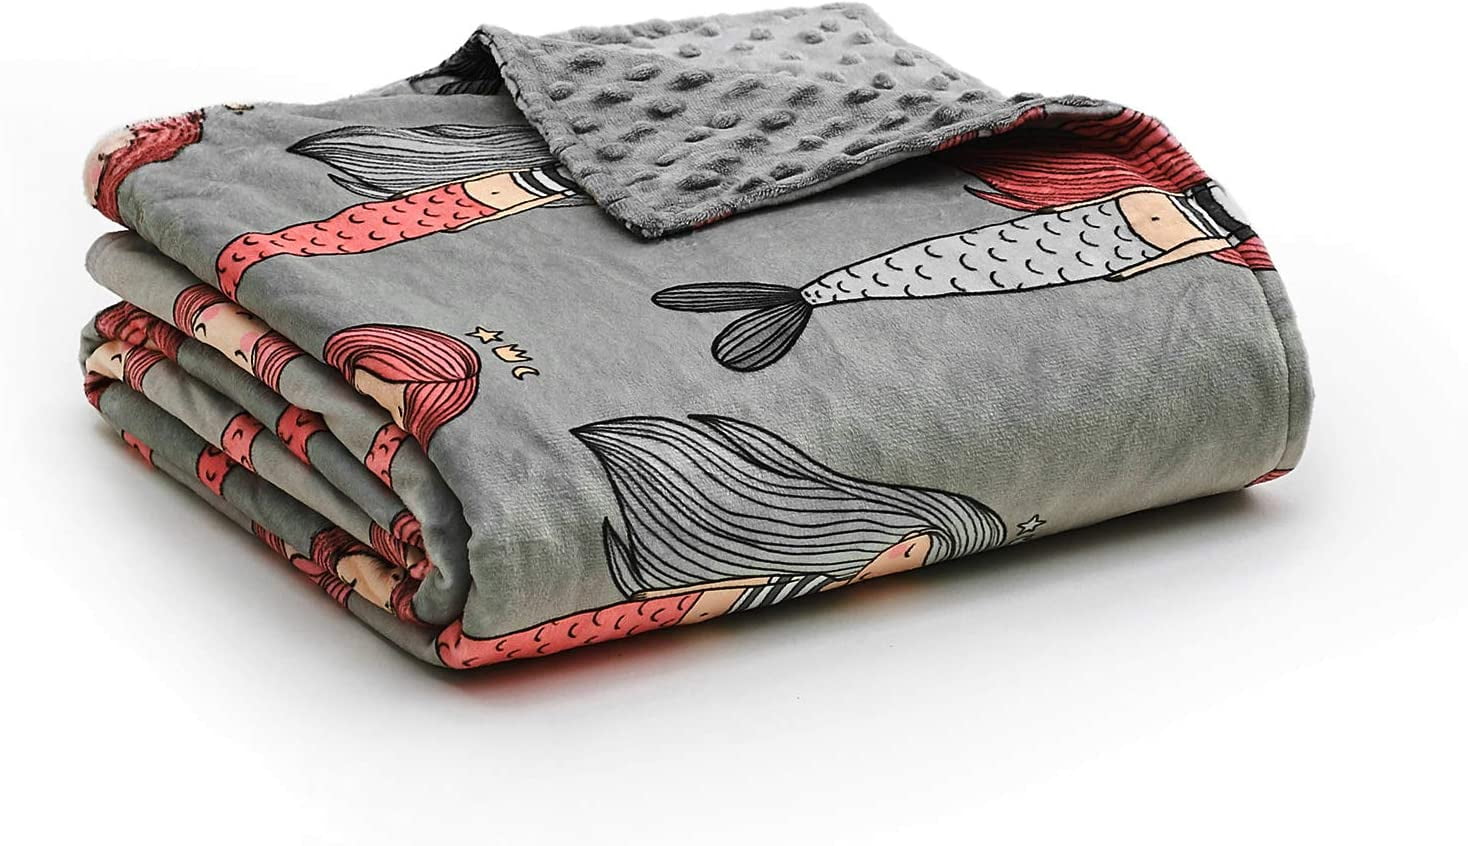 Ynm Minky Duvet Cover For Weighted, How To Keep Weighted Blanket In Duvet Cover